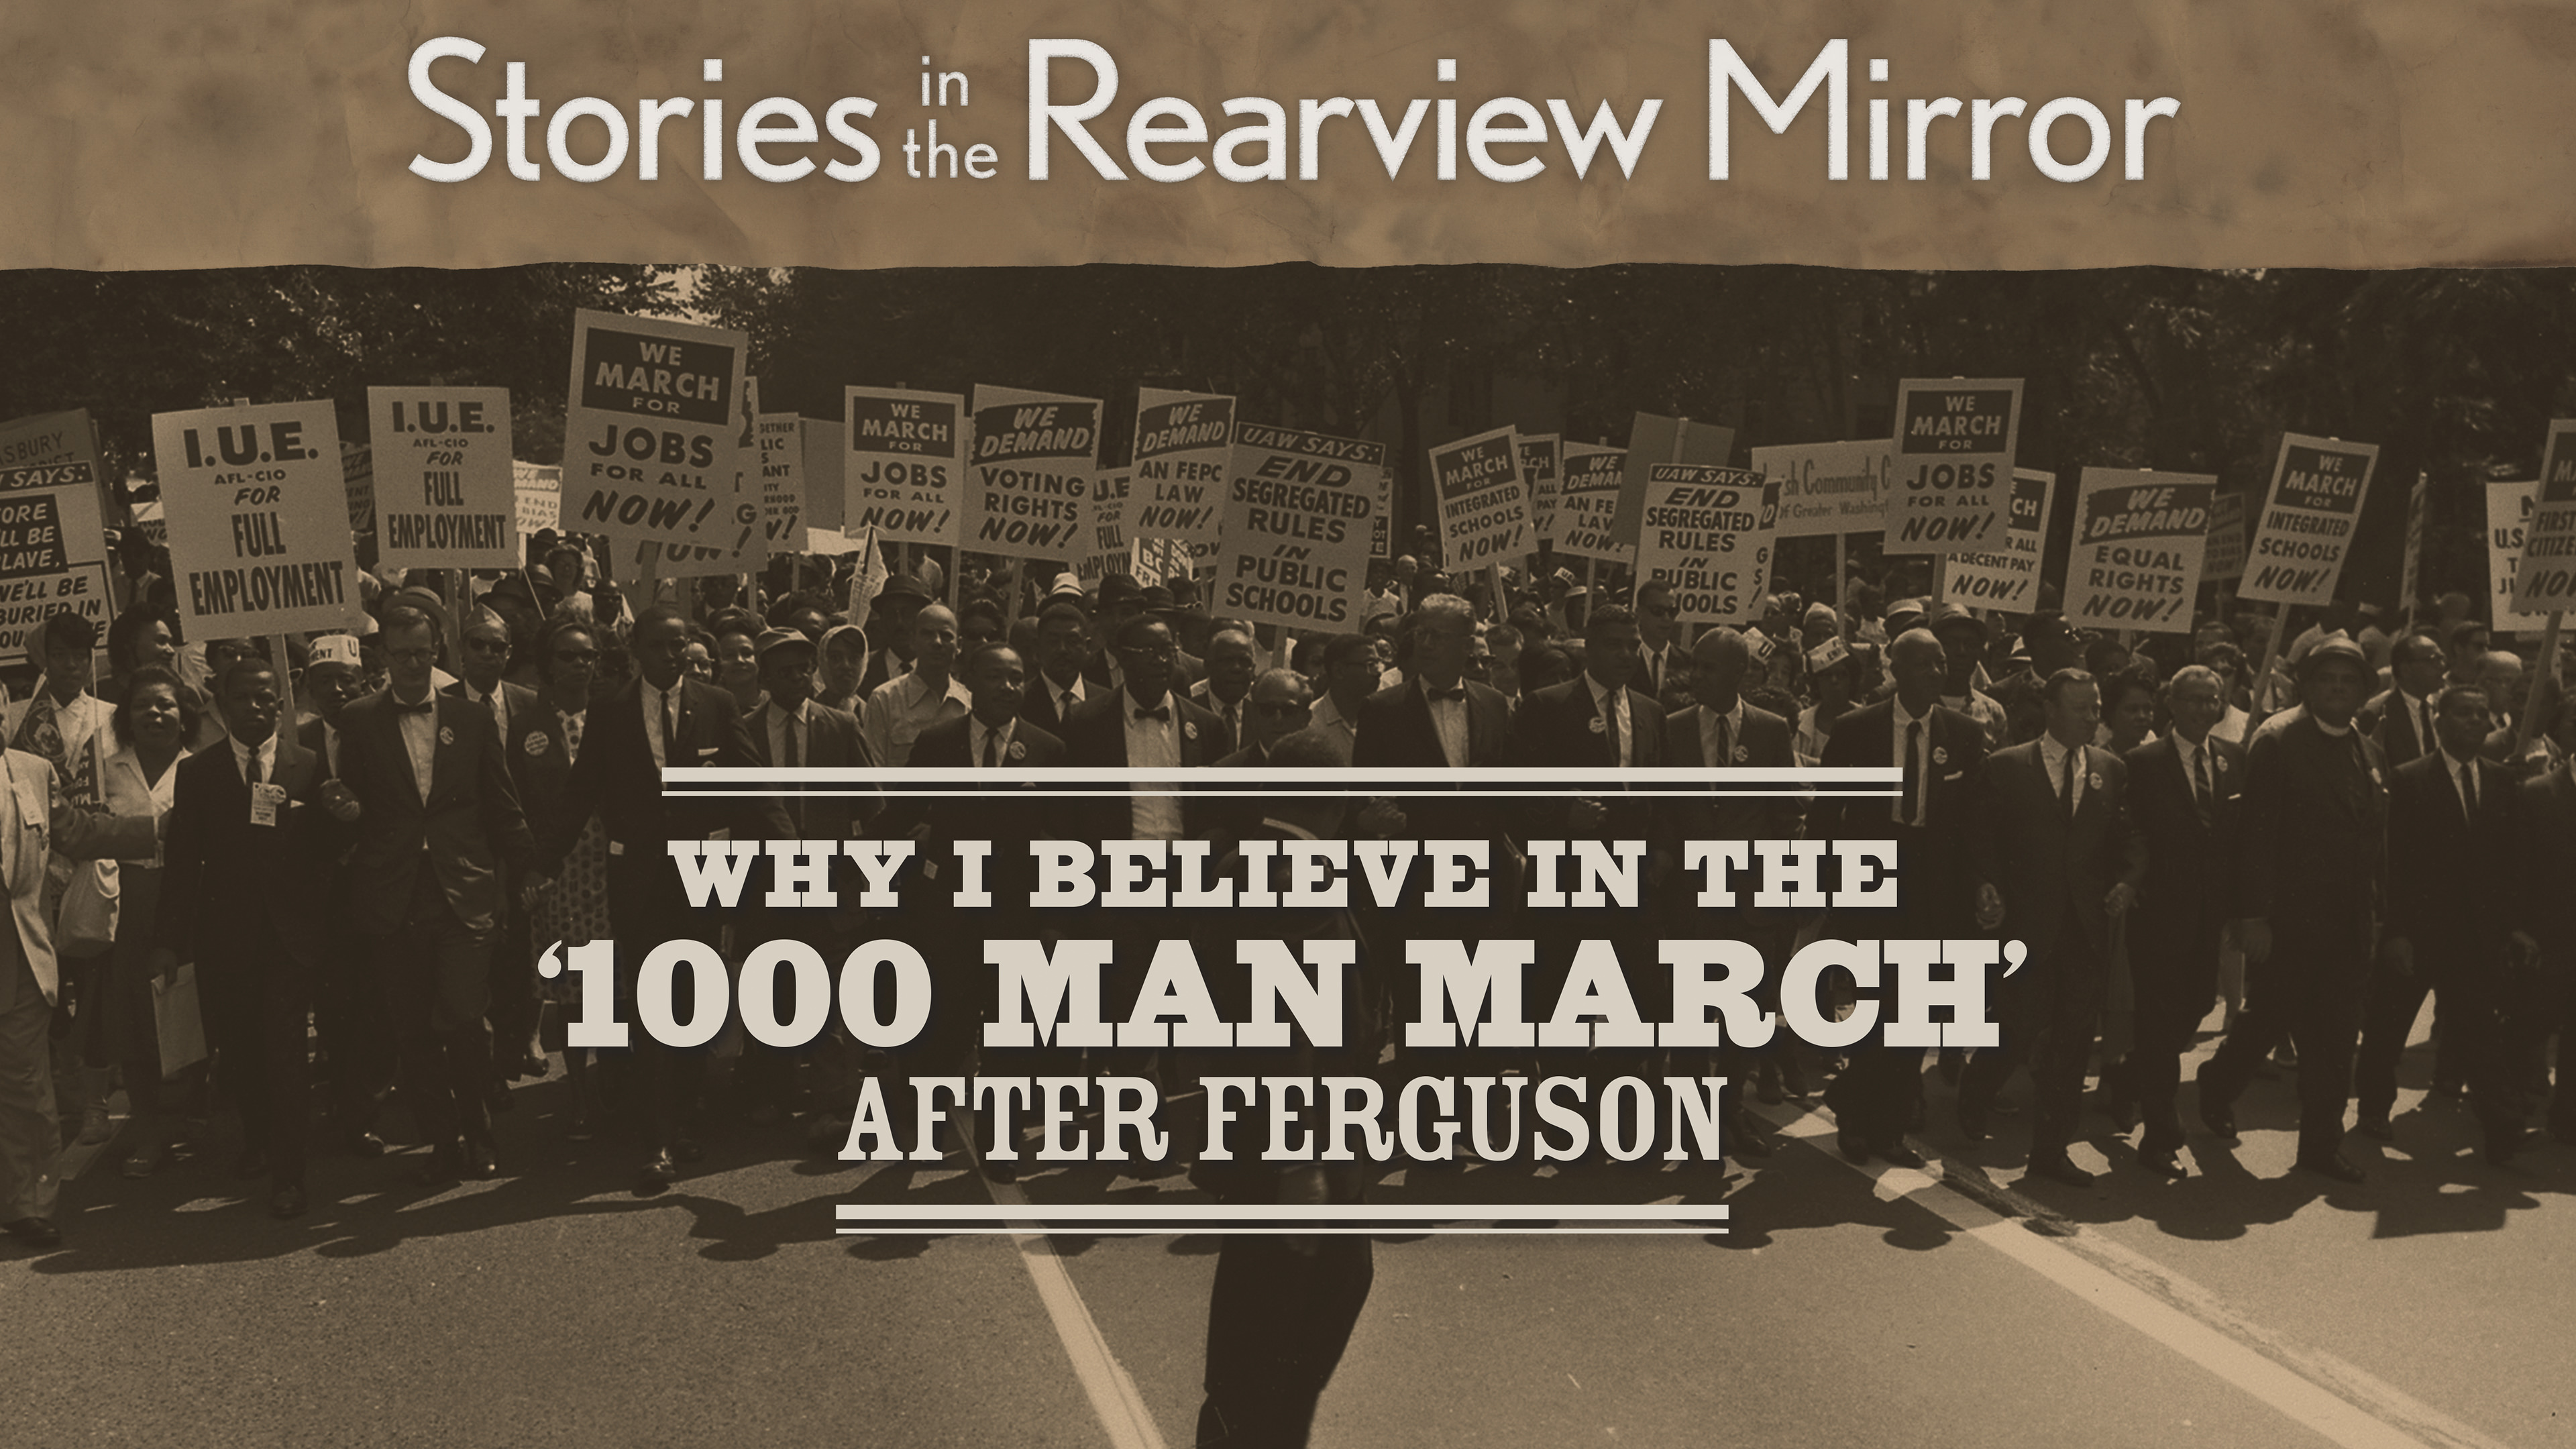 Why I Believe in the ‘1000 Man March’ After Ferguson